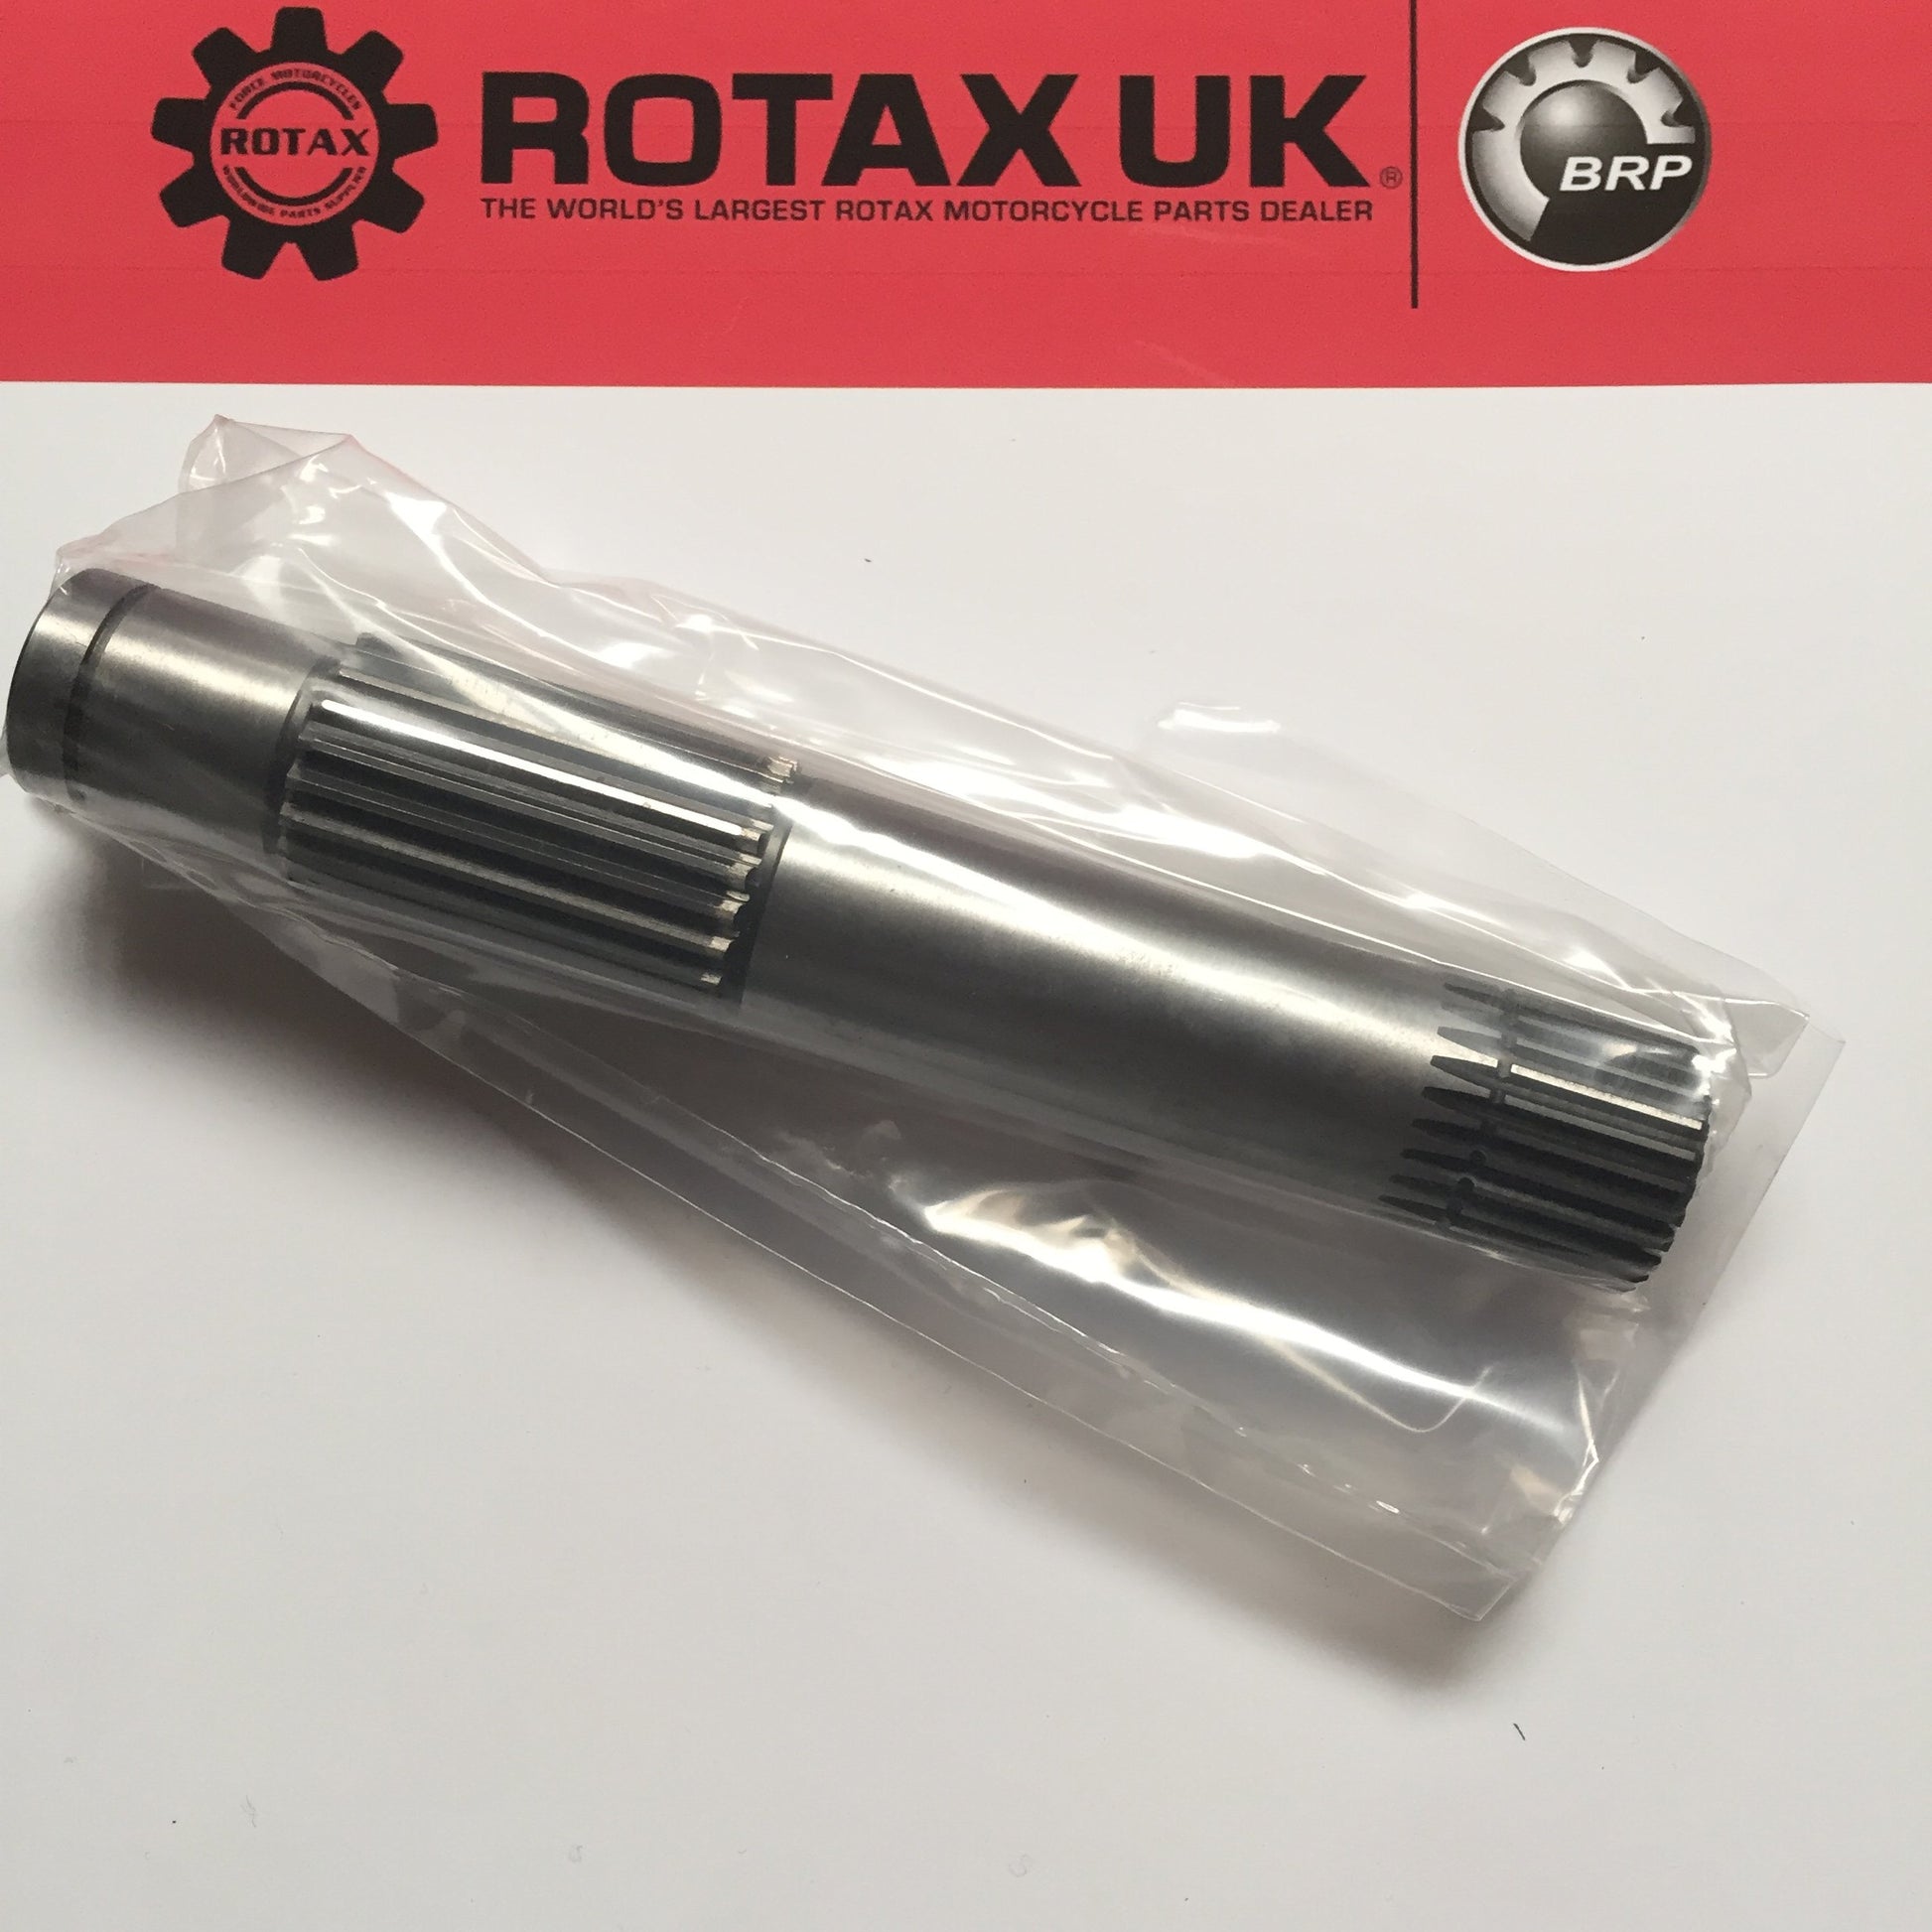 237647 - (was 237-645) - Oil Pump Shaft for engine types: 348, 504, 560, 604, 605.